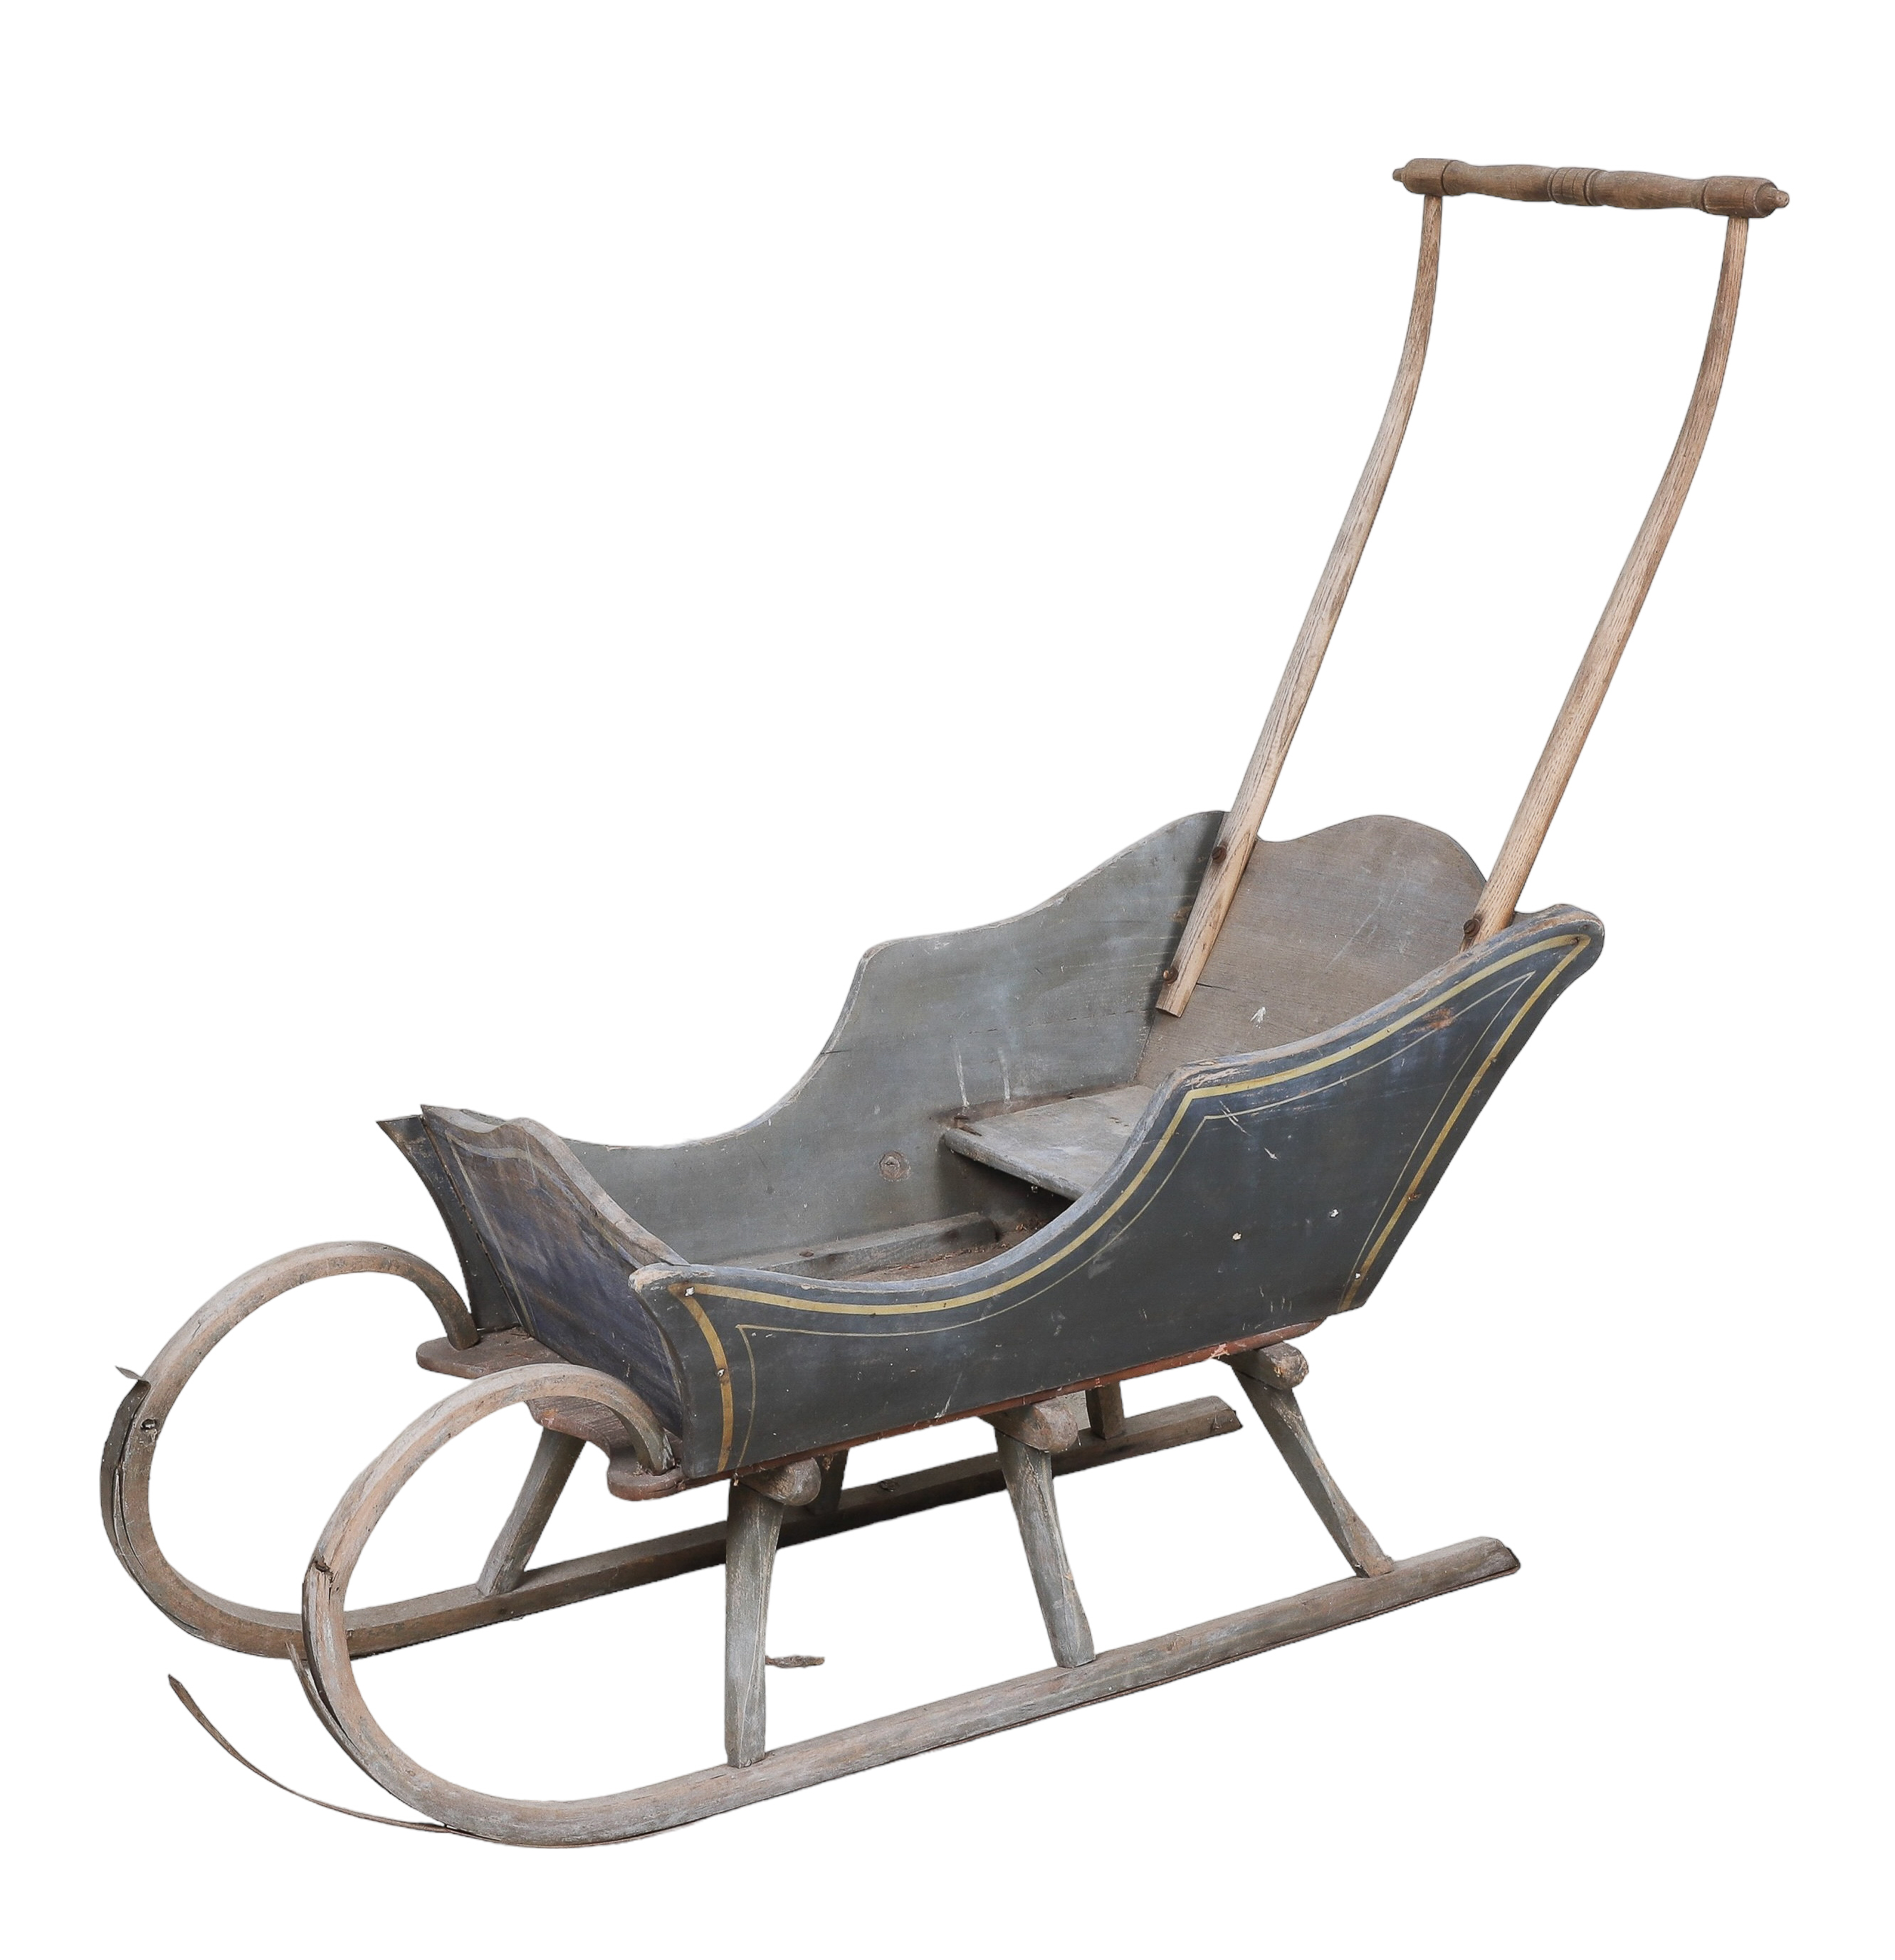 Childs push sleigh in old blue